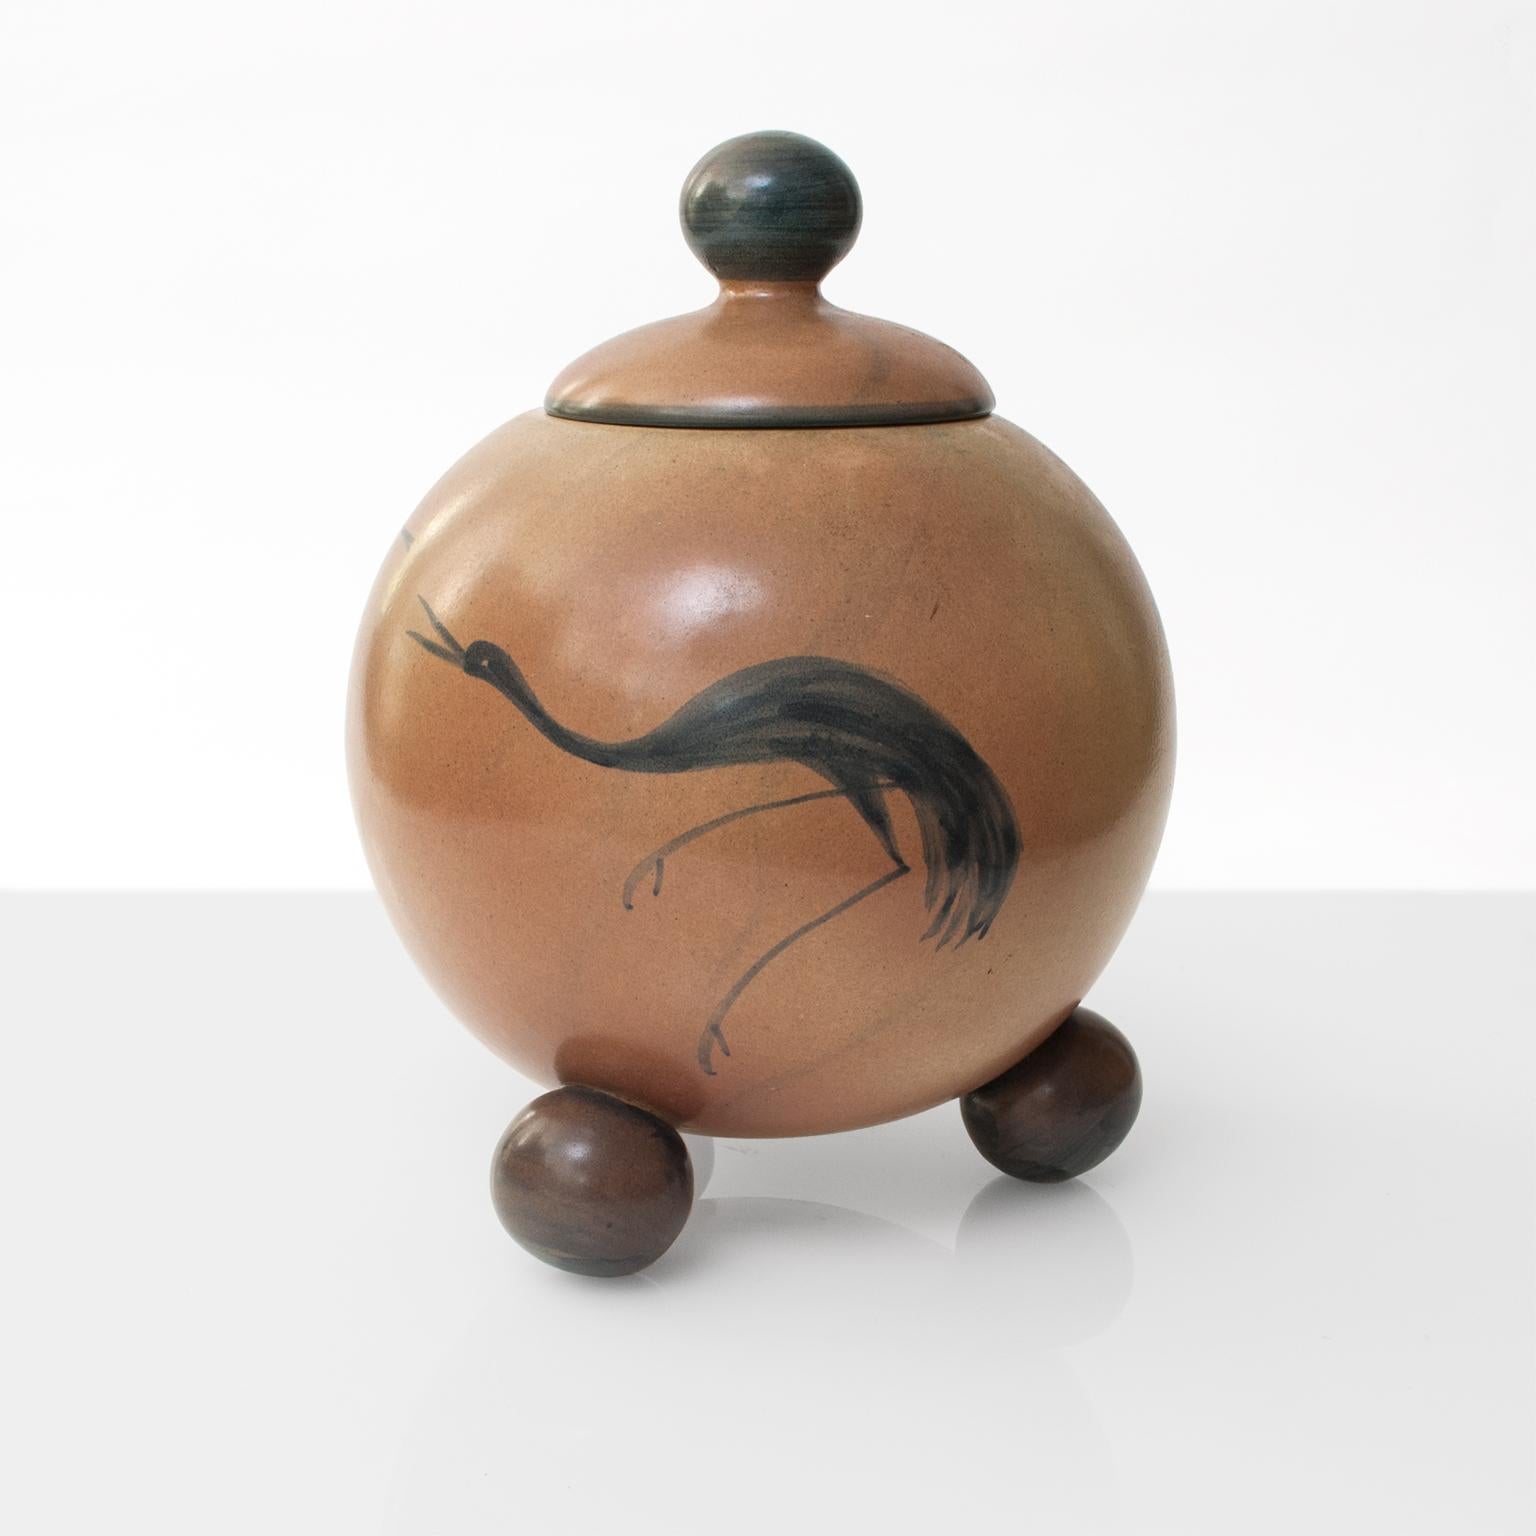 Åke Holm for Höganäs, Swedish Art Deco ceramic jar with lid hand decorated with a winged female figure, a crane and flora. The jar sits on 3 ball feet and the lid has a ball shaped knob. Holm's works are included in the Höganäs museum's permanent